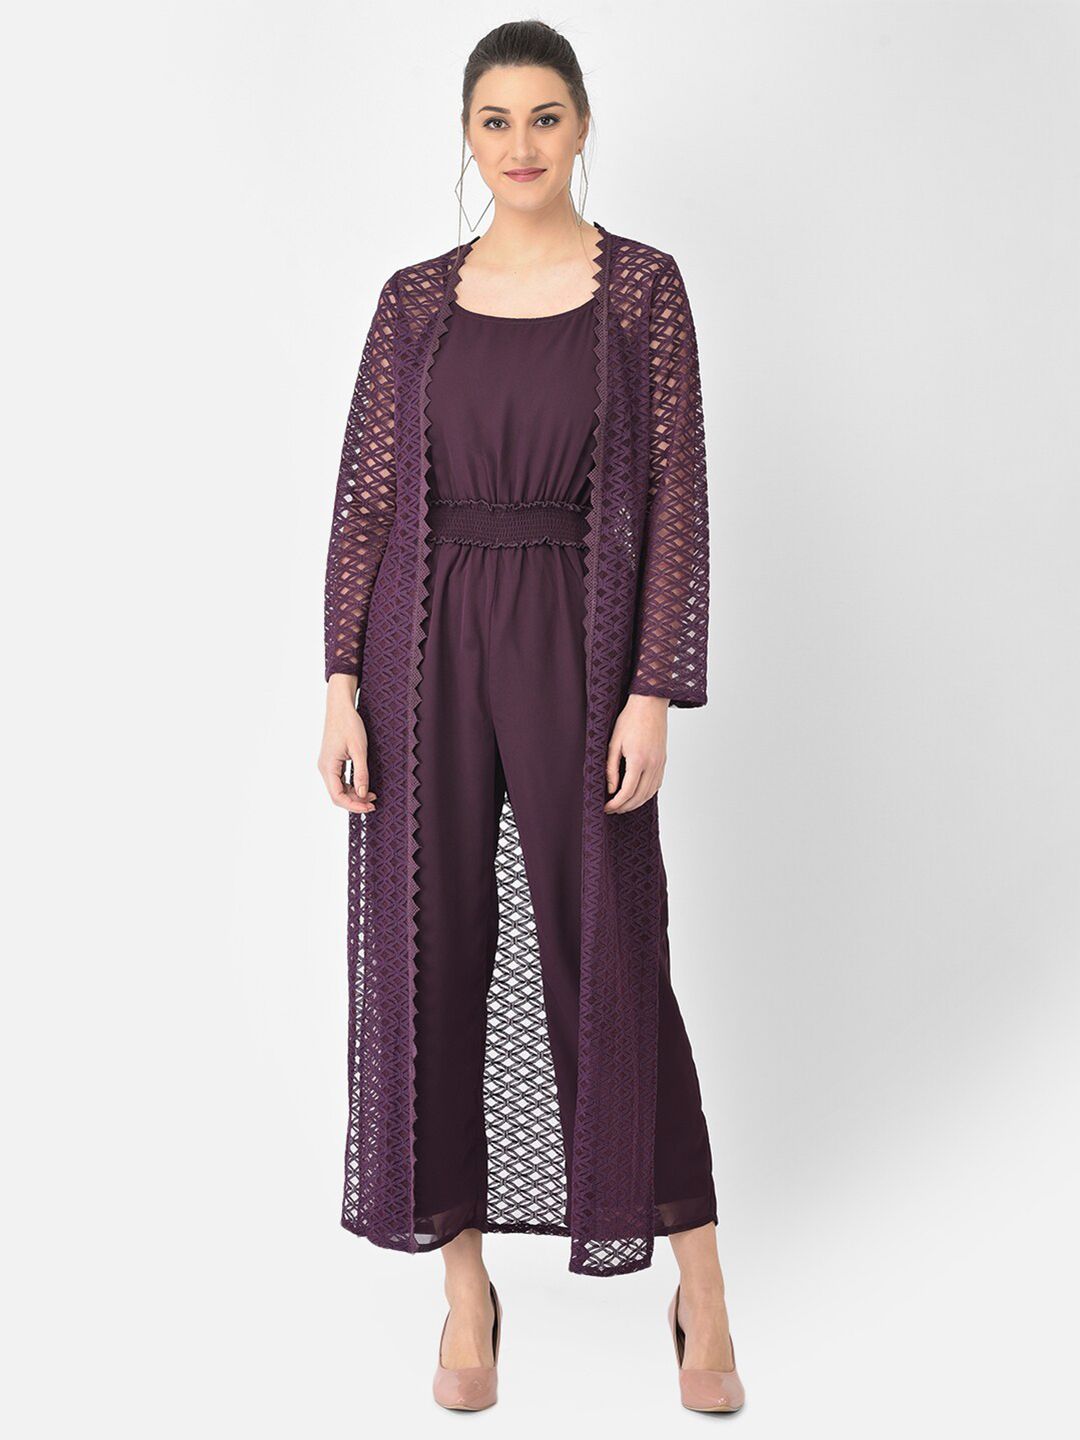 Eavan Burgundy Basic Jumpsuit With Lace Jacket Price in India